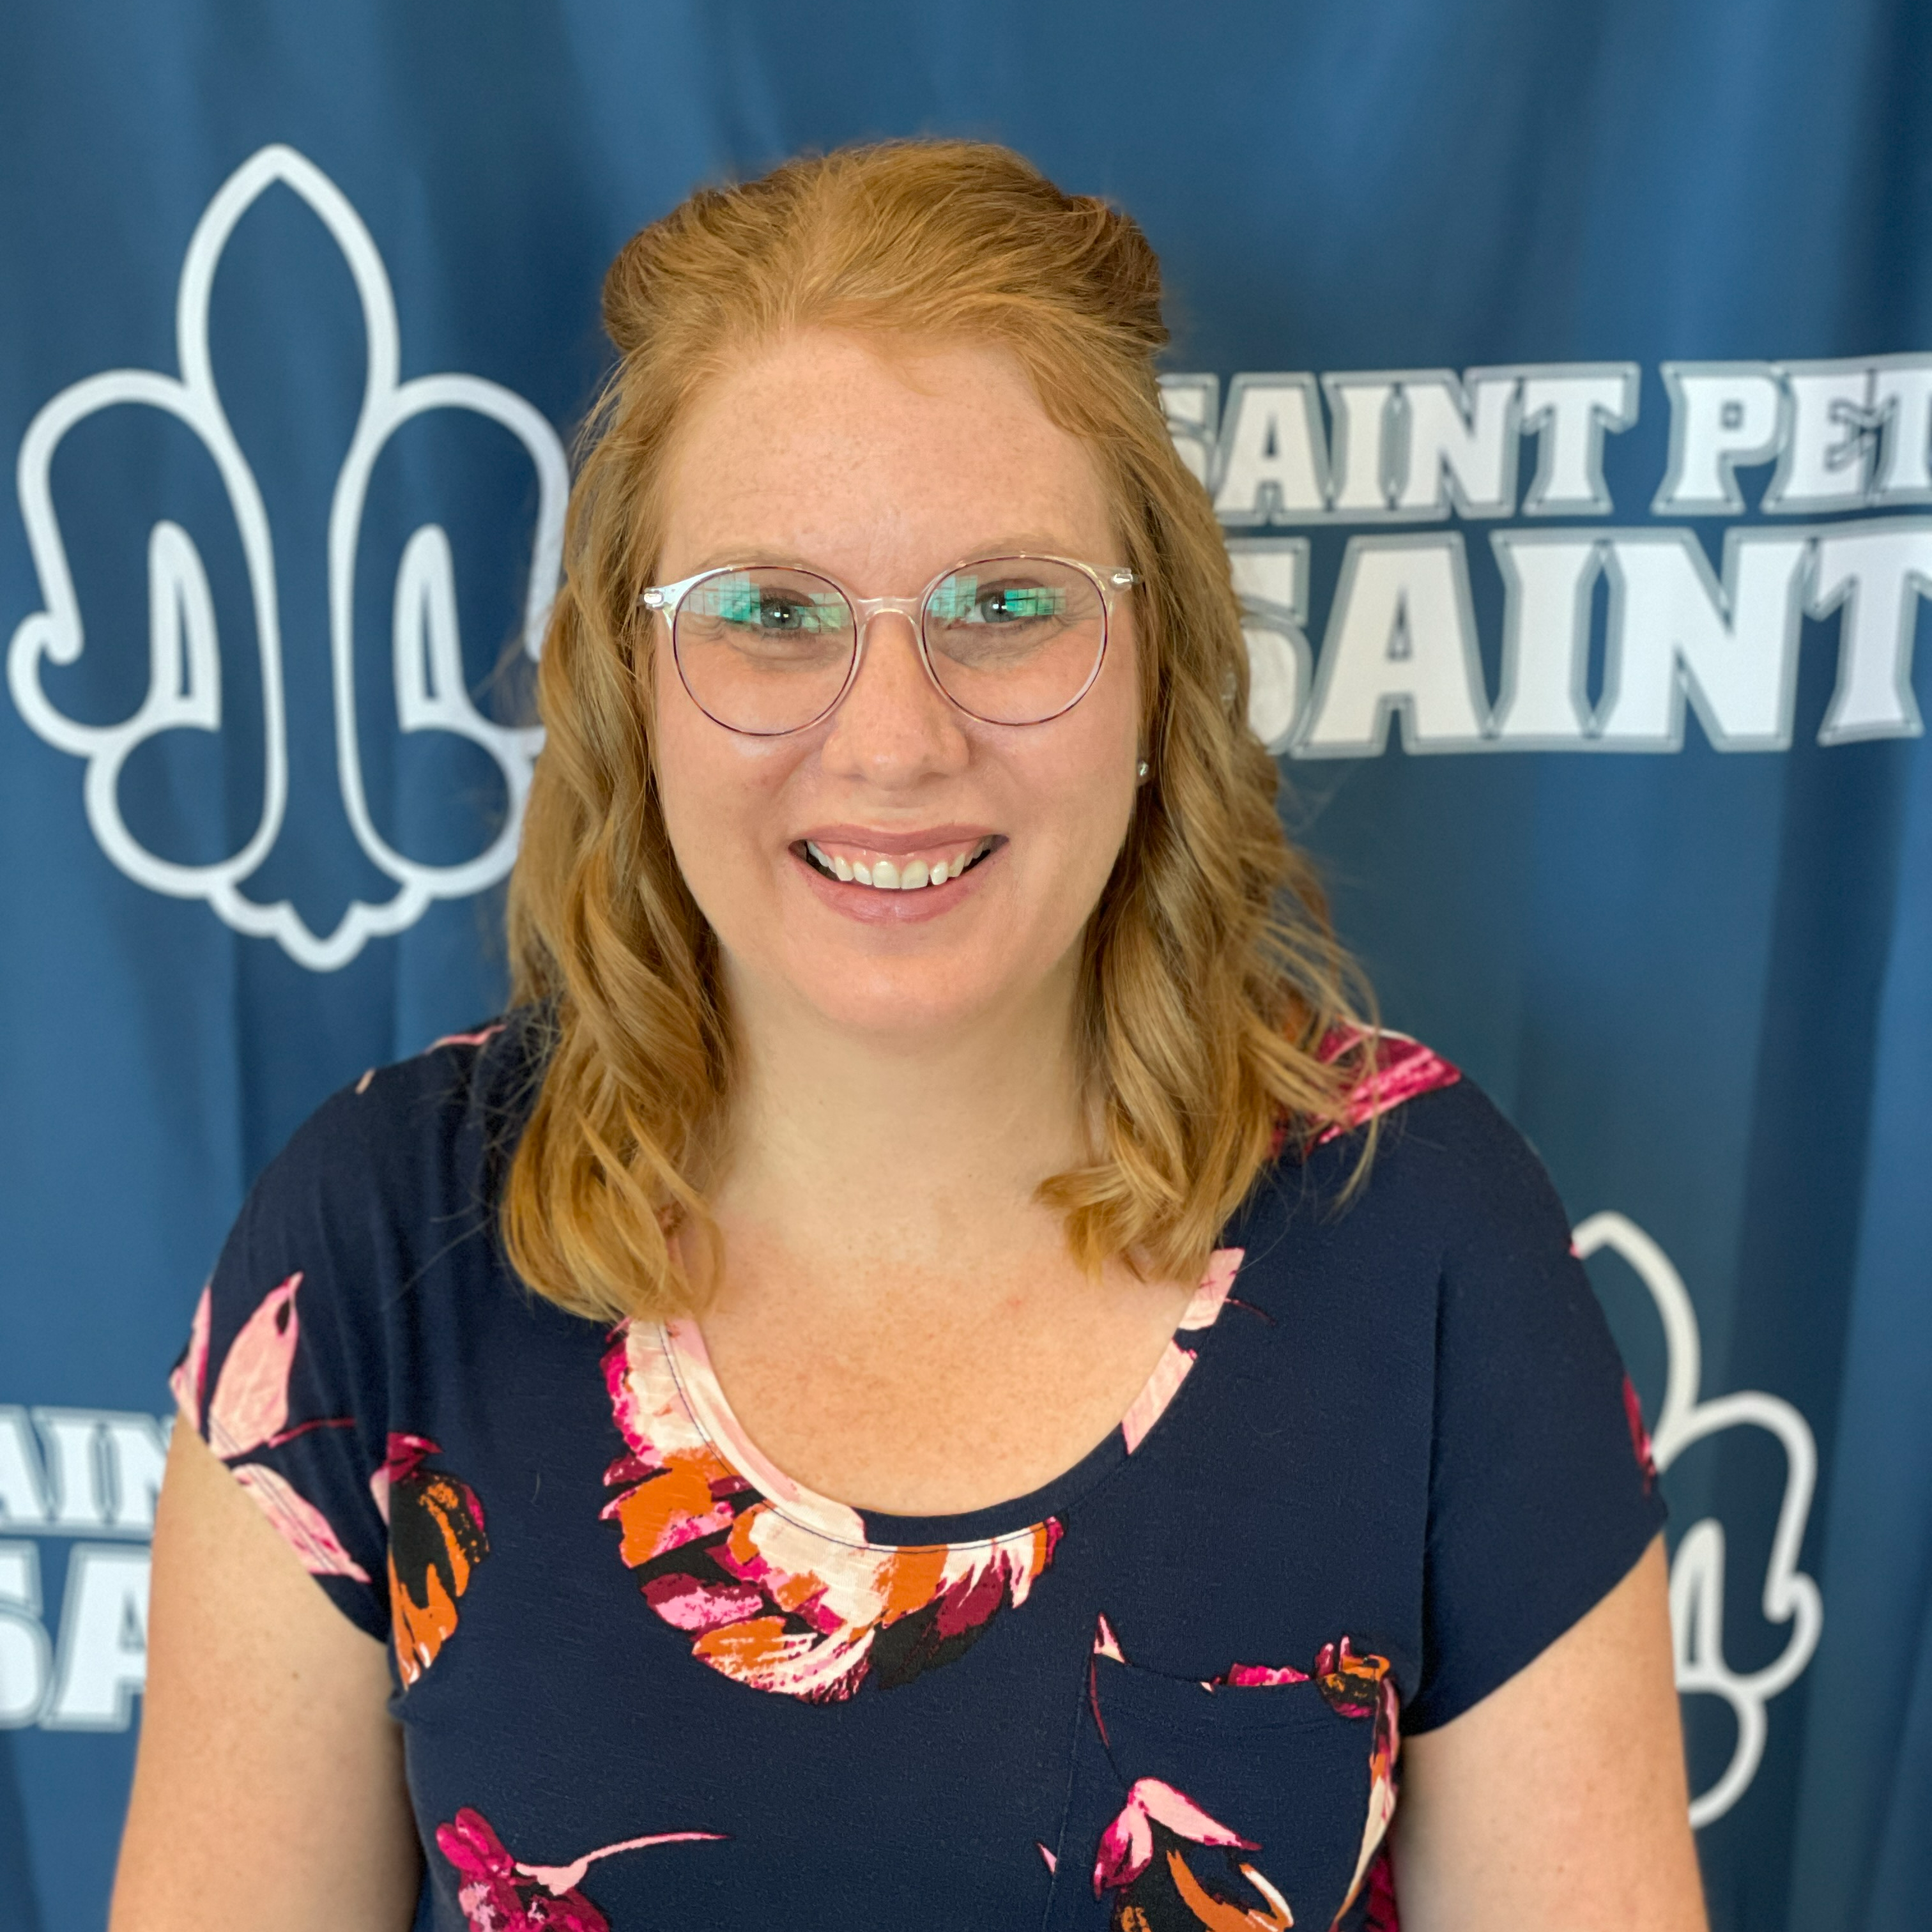 Welcome to Saints Nation, Social Worker Kylie Kuhlman!